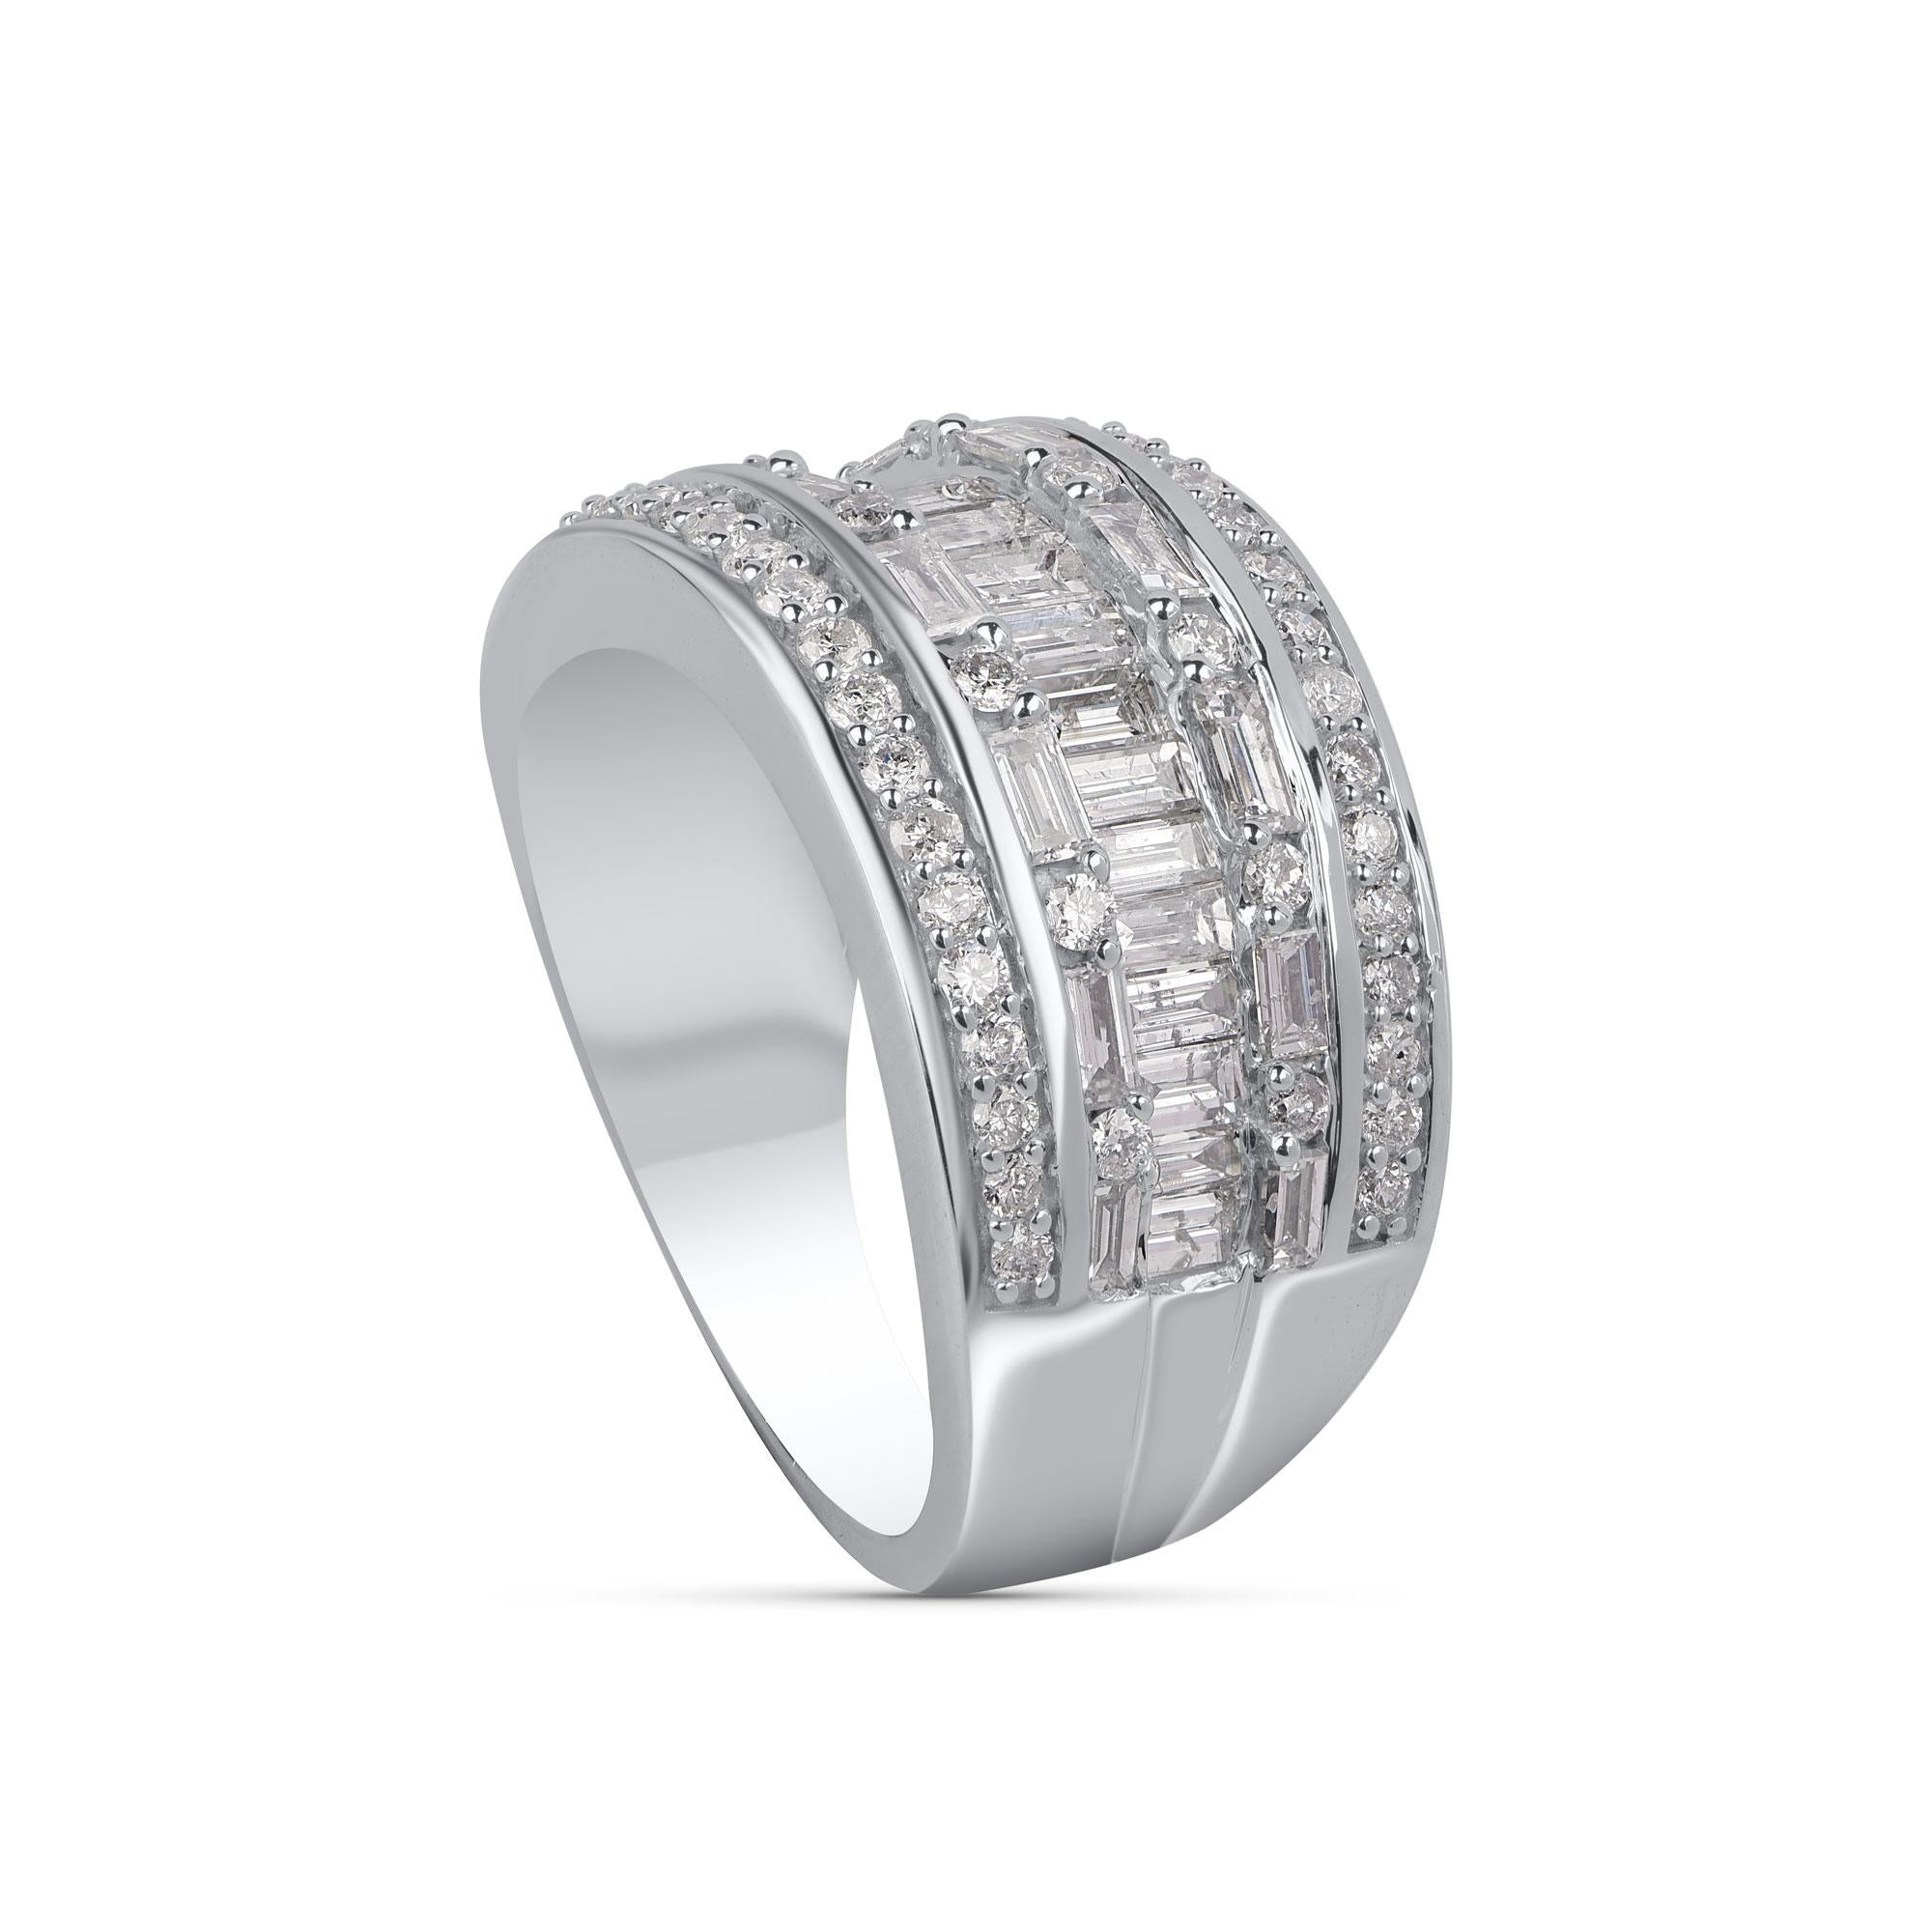 This stunning diamond engagement ring is studded with 52 round-cut diamonds and 35 baguette-cut diamonds in pave and channel setting and beautifully crafted in 10 kt white gold. The diamonds are graded JK color, I3 clarity. Metal color and ring size